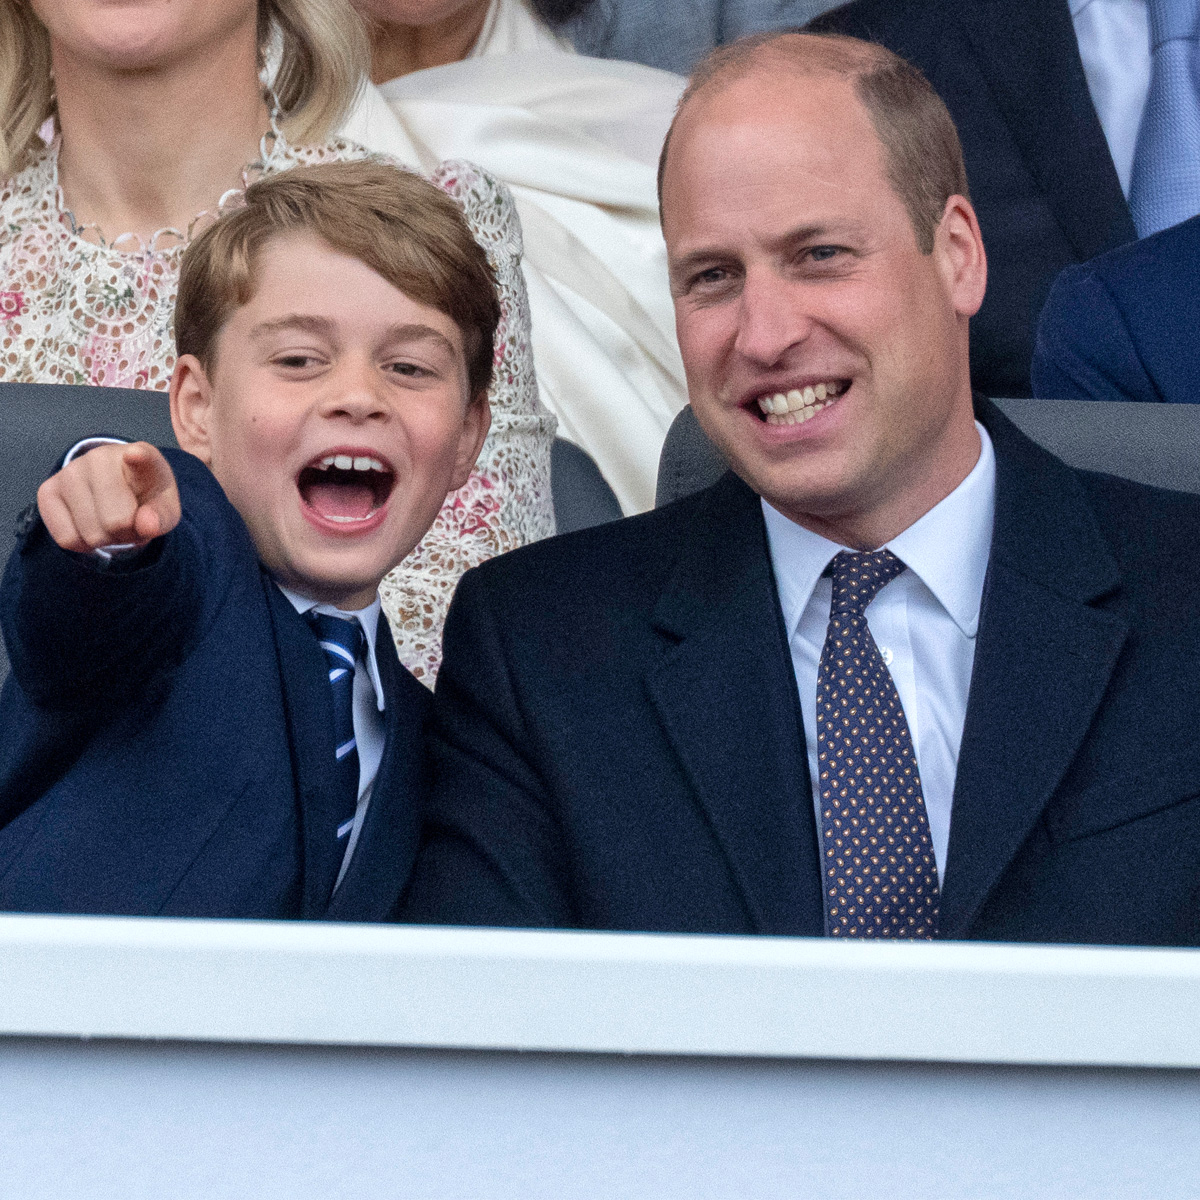 See Prince William’s Heartwarming Father’s Day 2022 Photo With 3 Kids